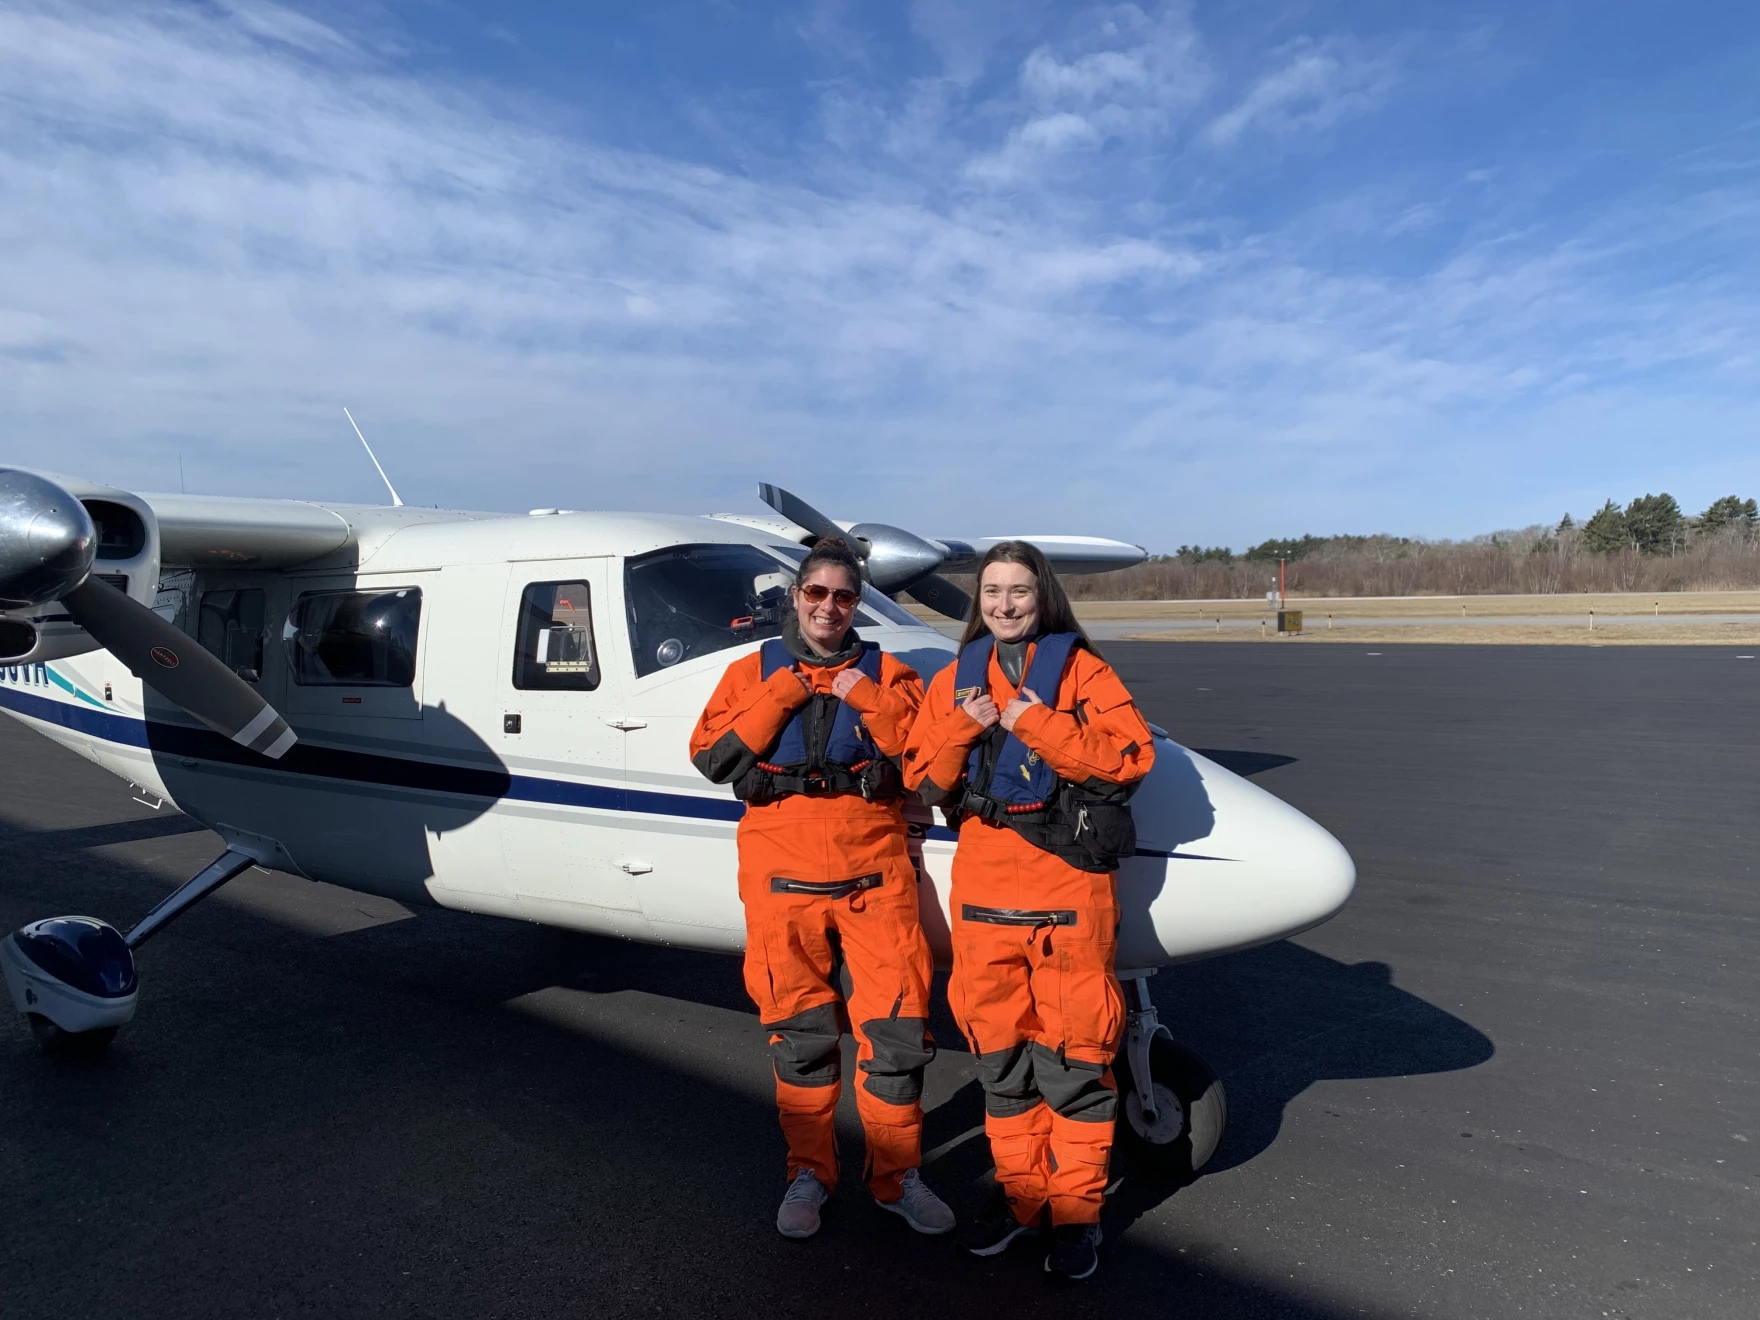 Orla O'Brien and Katherine McKenna, wearing orange jumpsuits and standing in front of a small plane, are both scientists at the New England Aquarium and prepare for takeoff from the New Bedford Regional Airport on March 10, 2023. The two will fly over the Nantucket Shoals as part of the aquarium's aerial survey program, which documents North Atlantic right whales, dolphins, sharks and other marine mammals. 